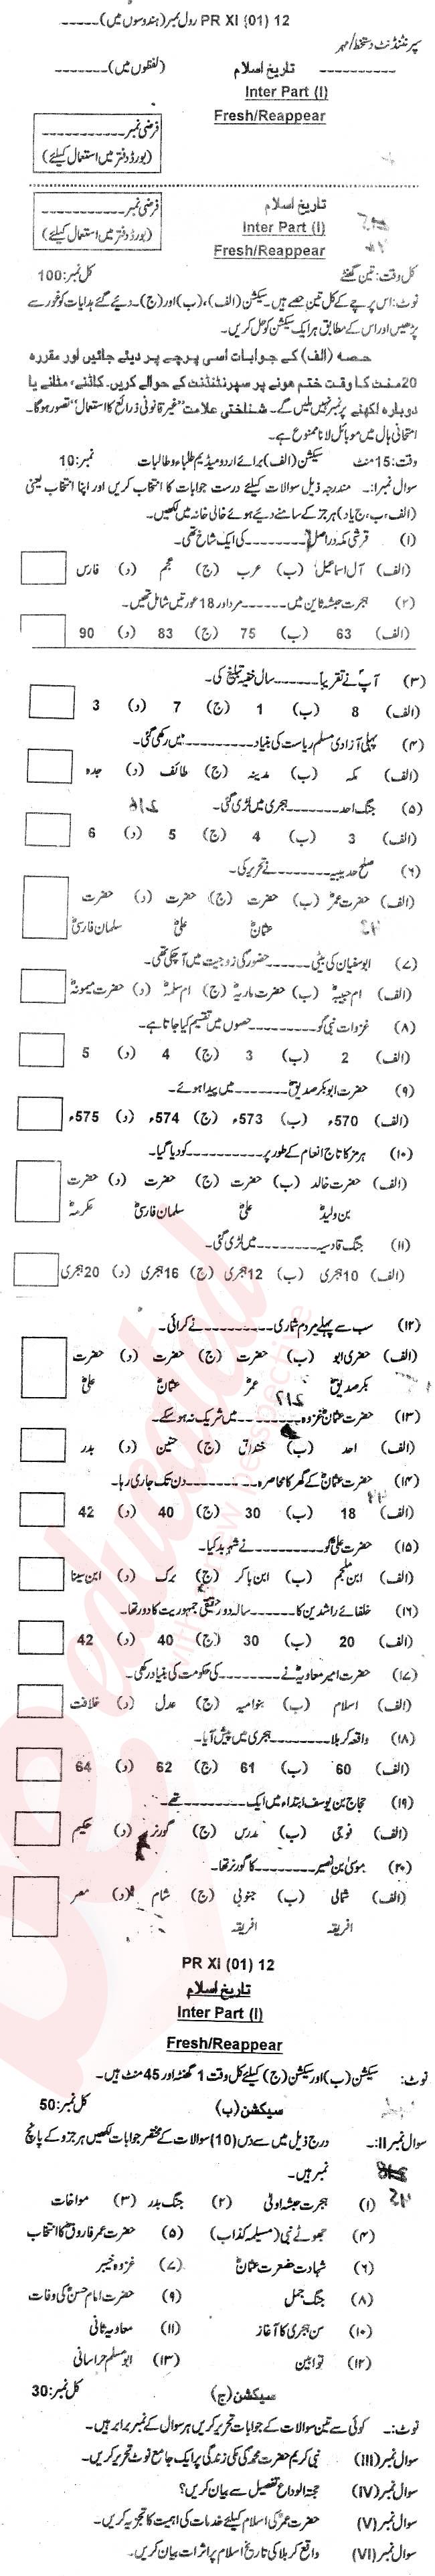 Islamic History FA Part 1 Past Paper Group 1 BISE Bannu 2012